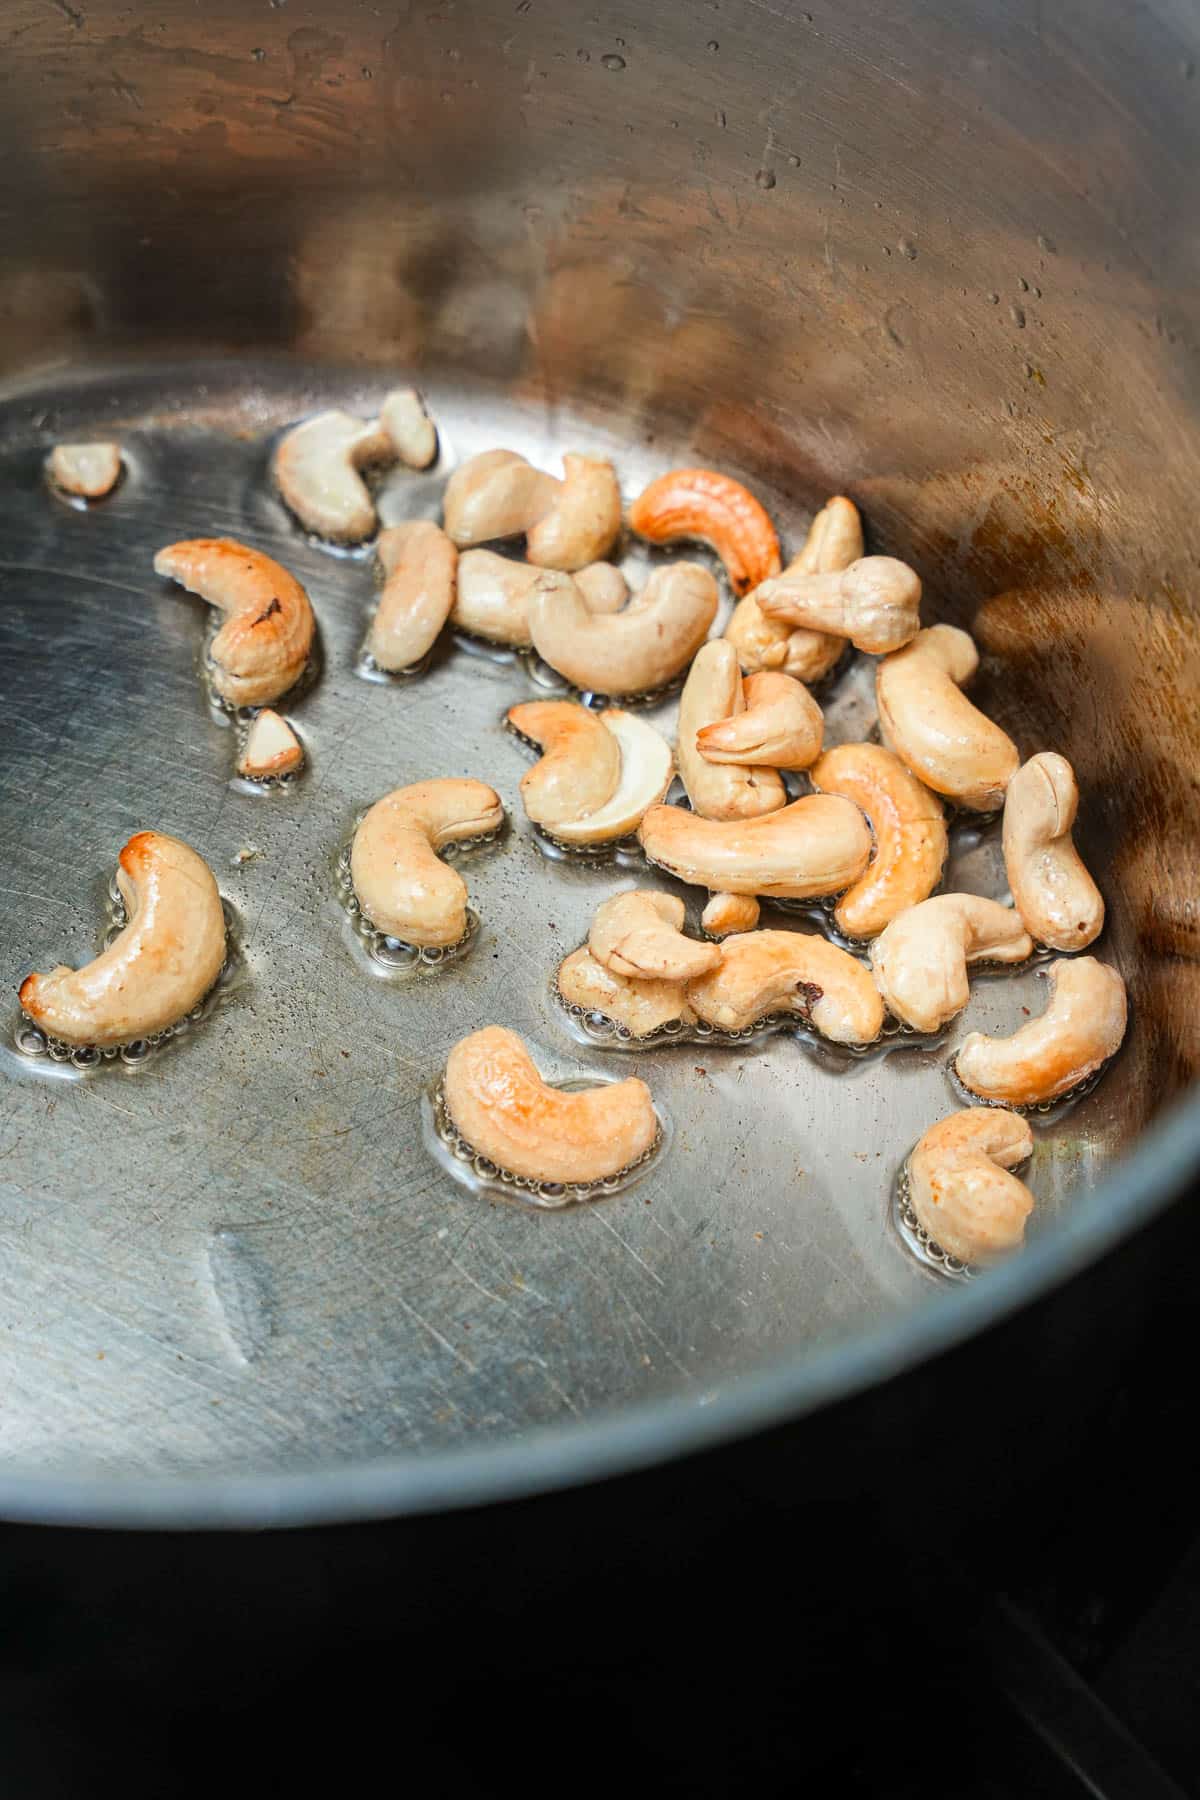 Cashews are being fried in a pan on a stove.